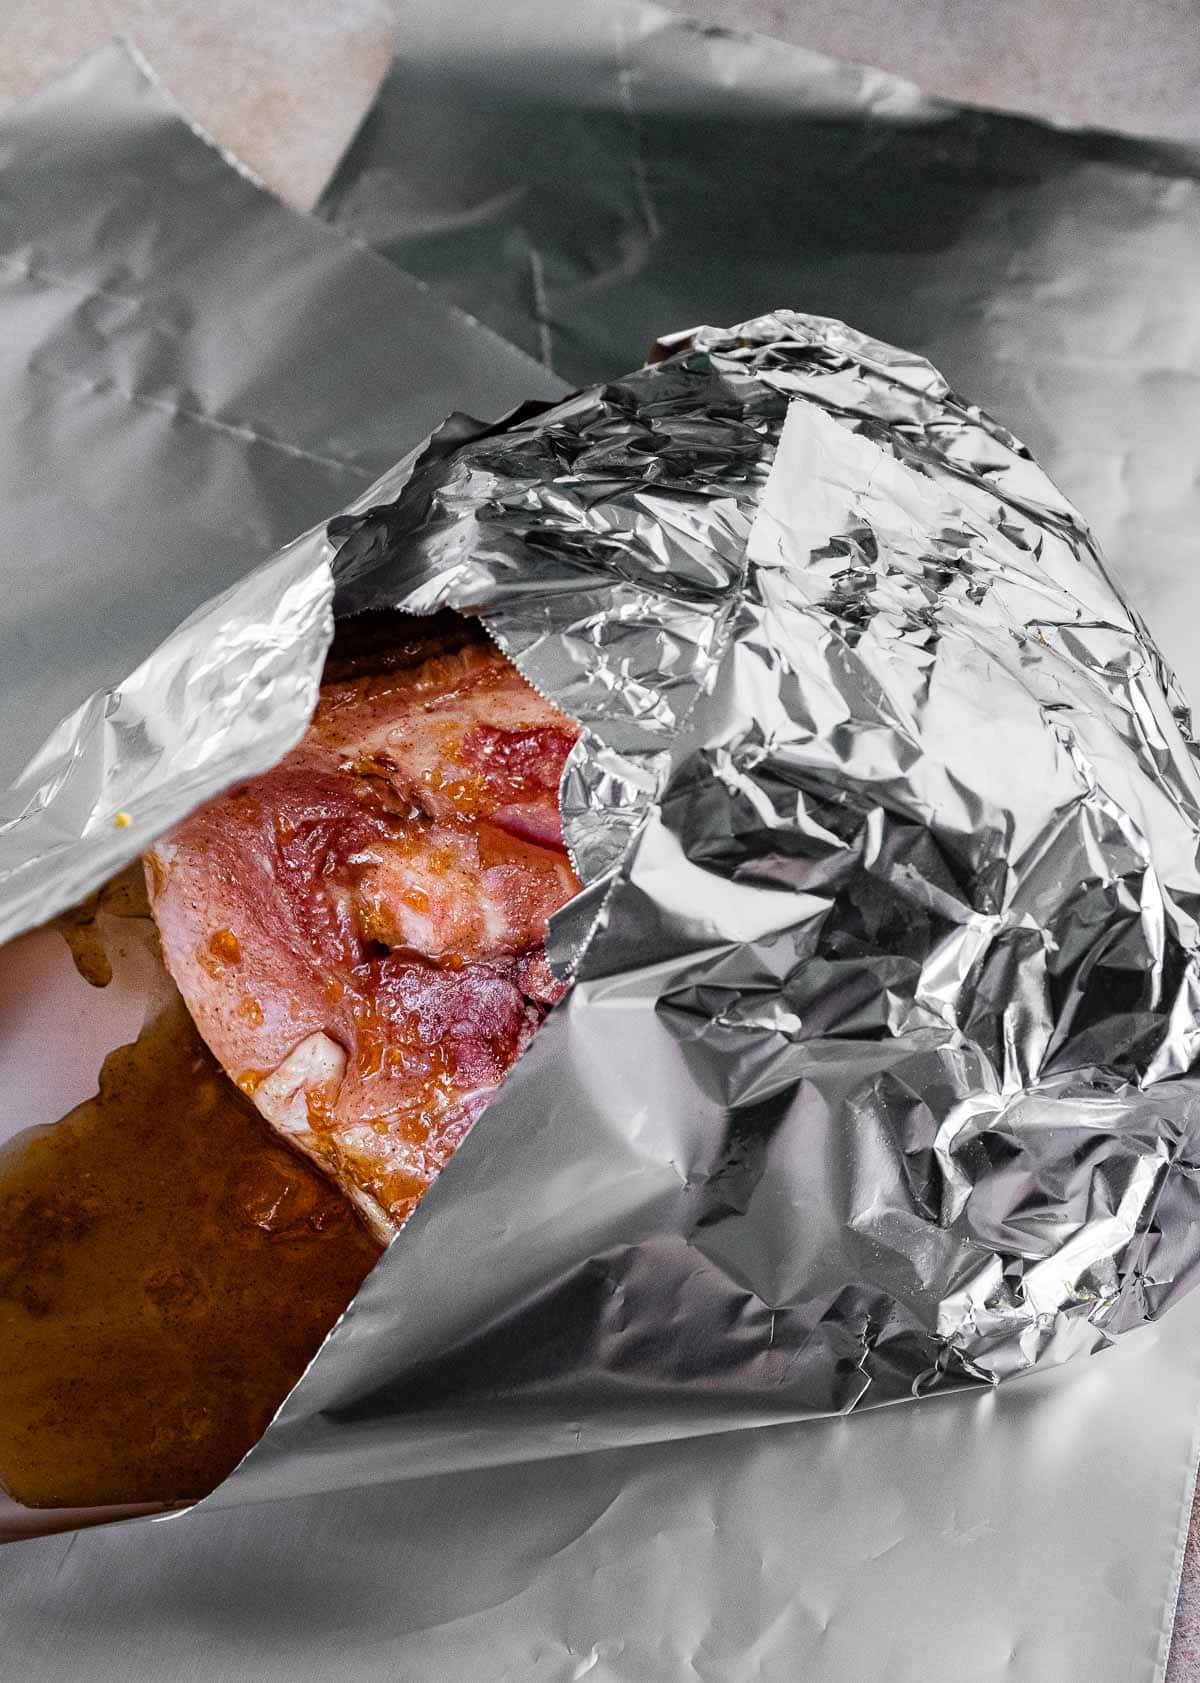 Brown Sugar Peach Baked Ham sauce being wrapped in foil